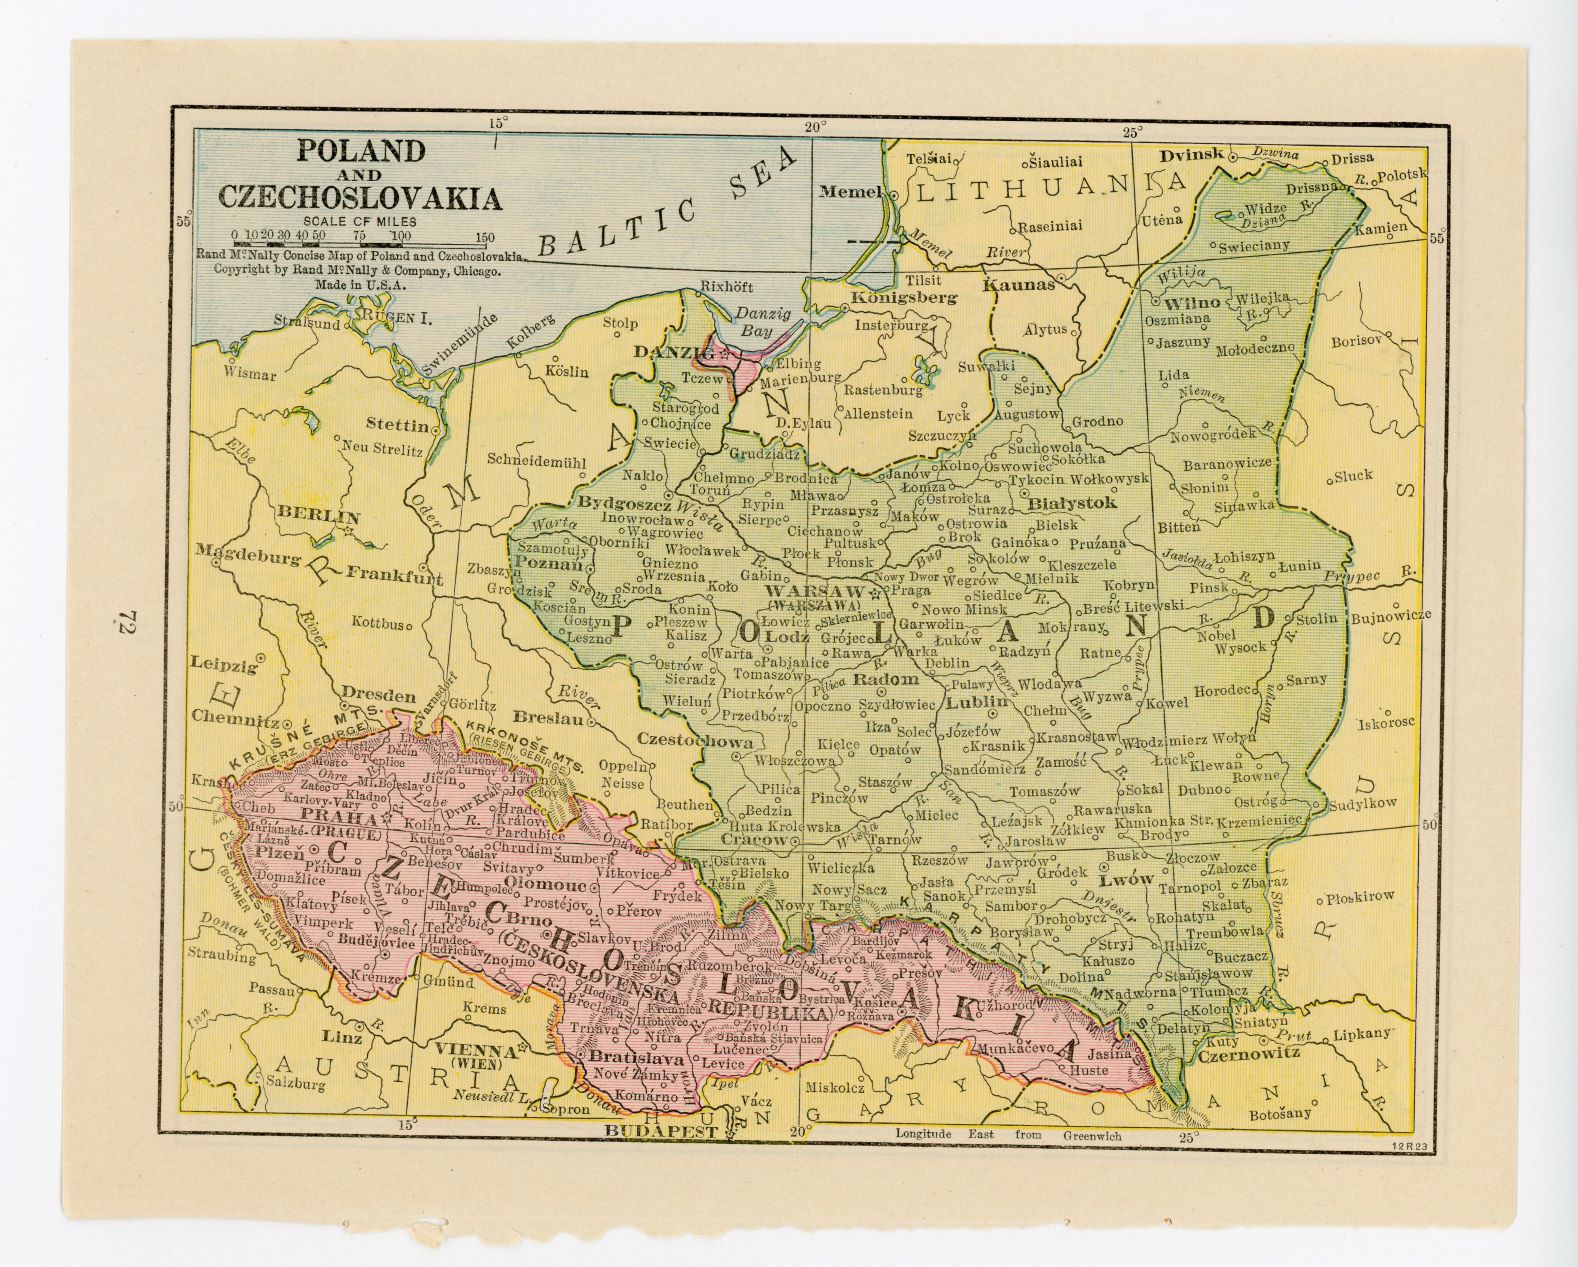 1926 Vintage Atlas Map Page - Poland and Czechoslovakia (on one side)